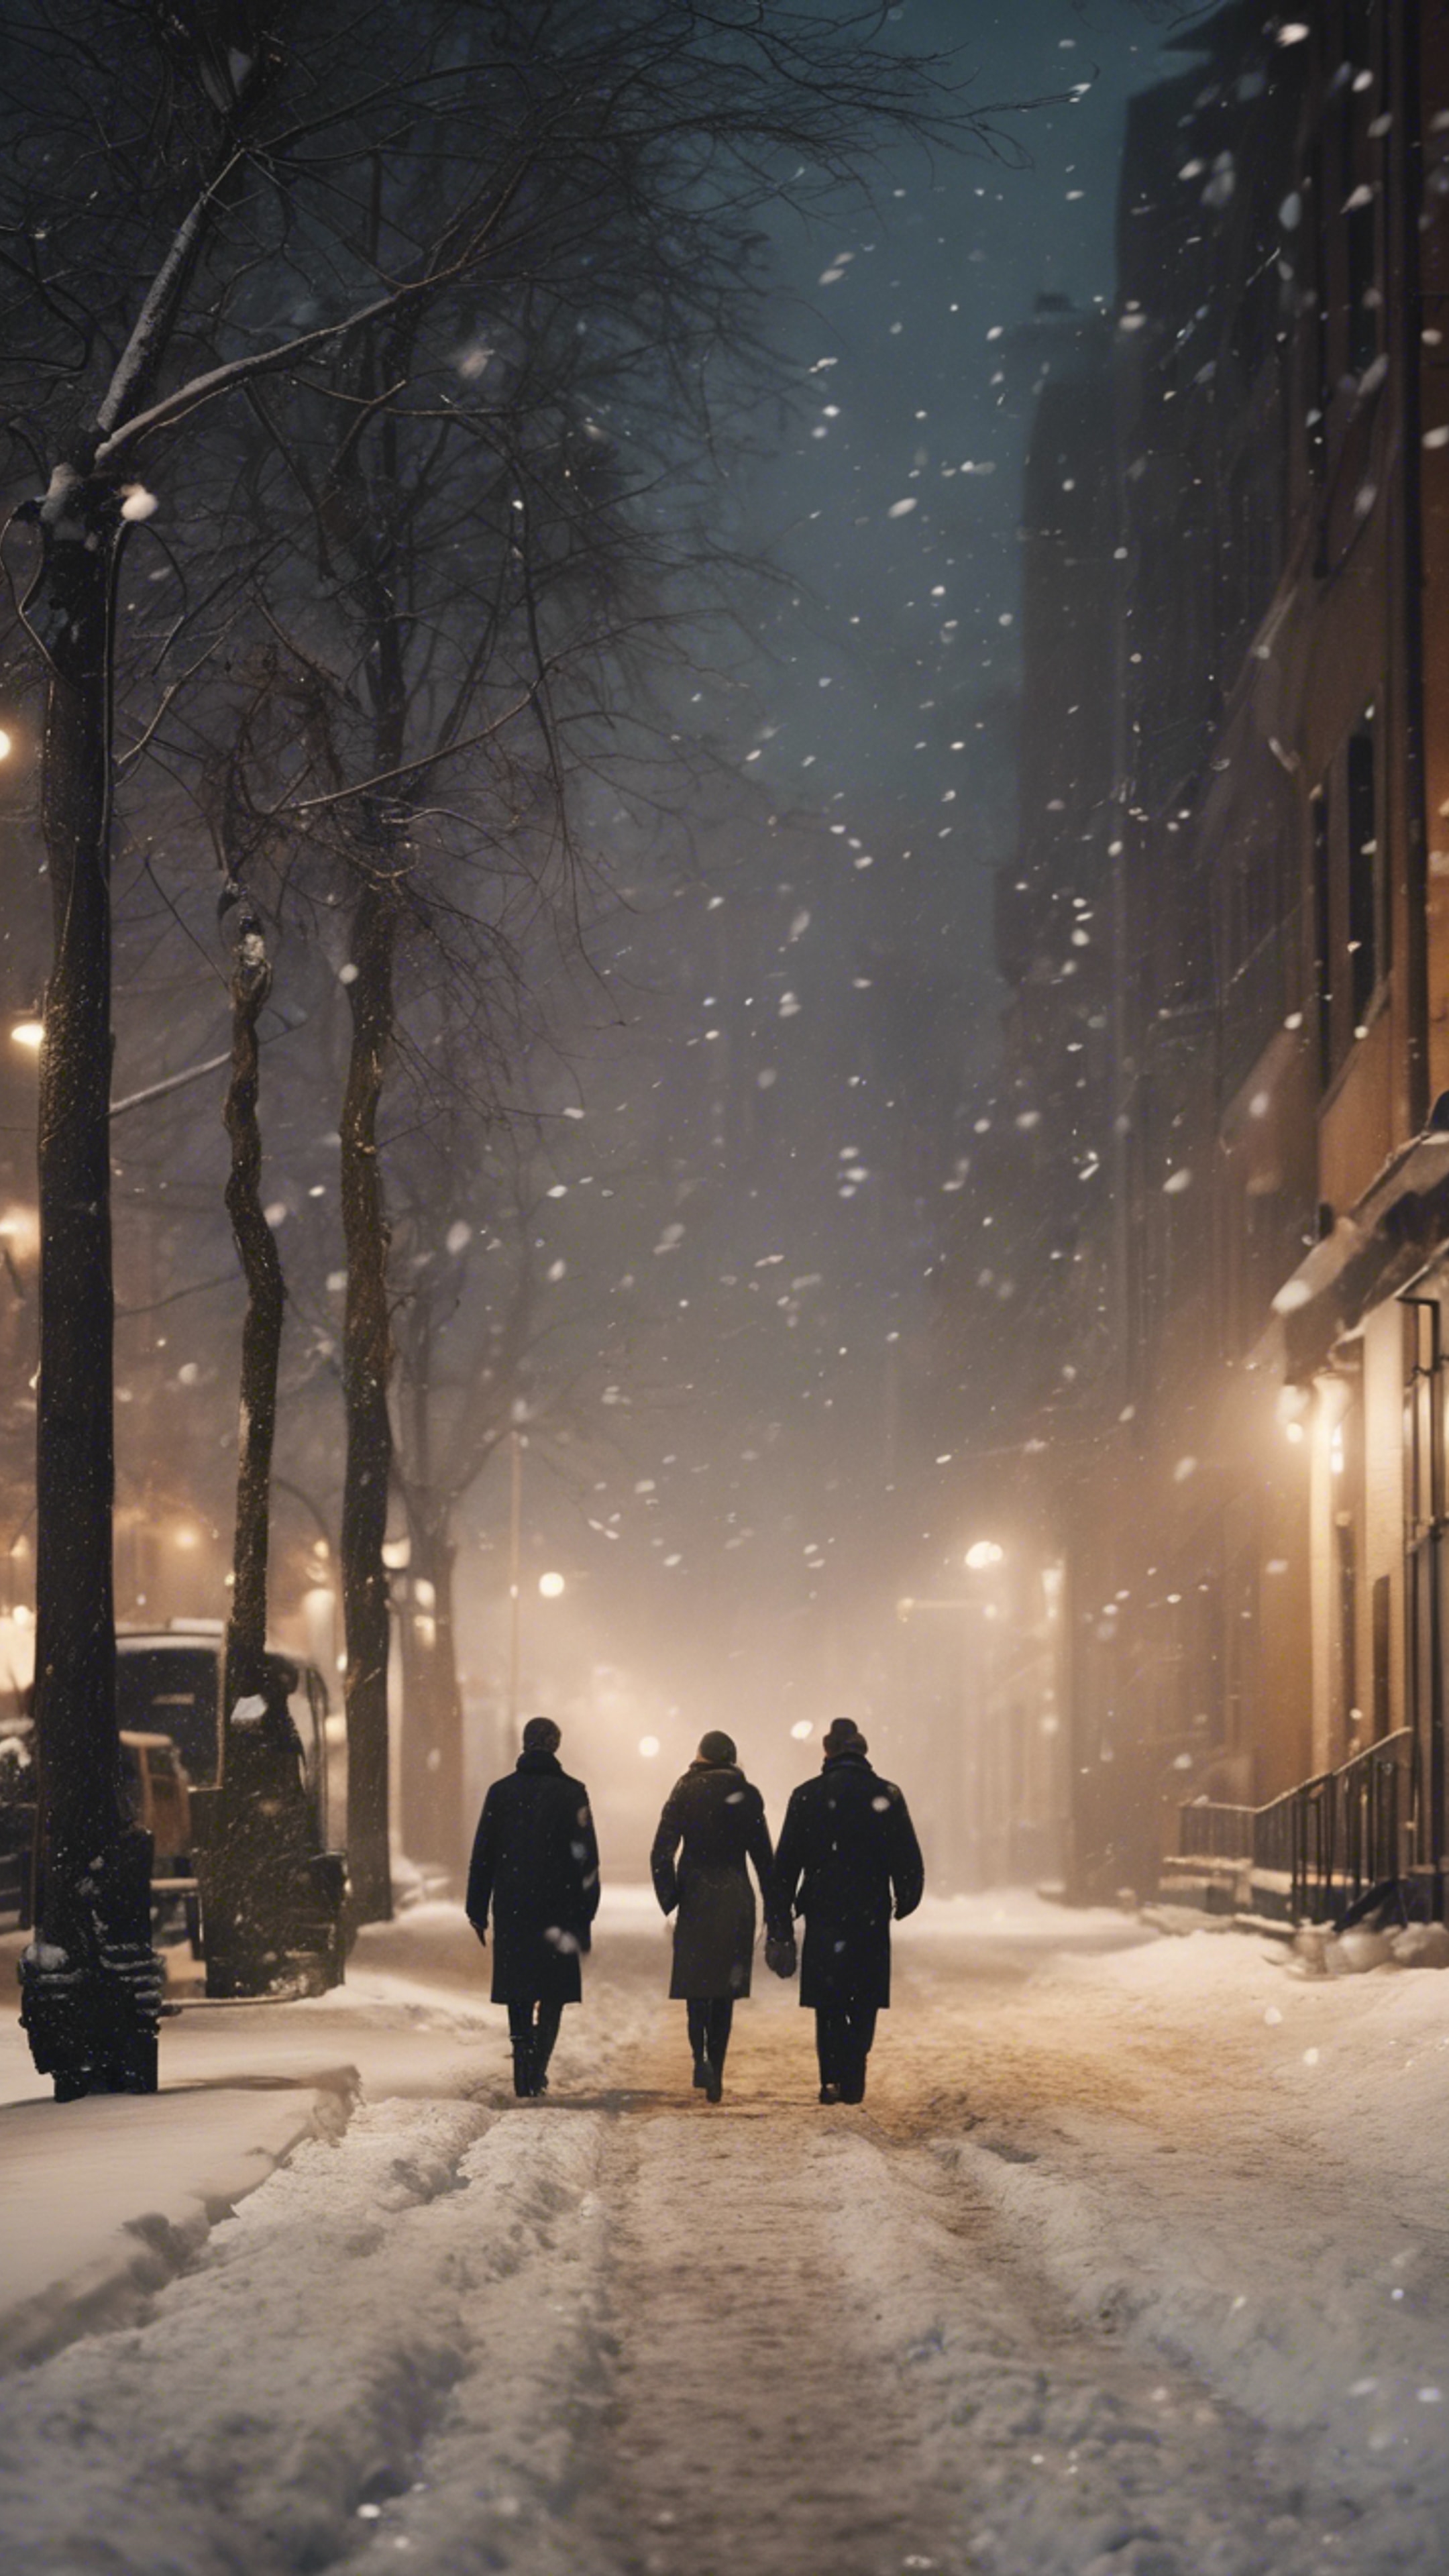 “A city street under heavy snowfall at night, illuminated by the warm glow of street lights, with shadowy figures of people walking.” Wallpaper[40535b8bb4bb41d4b88f]